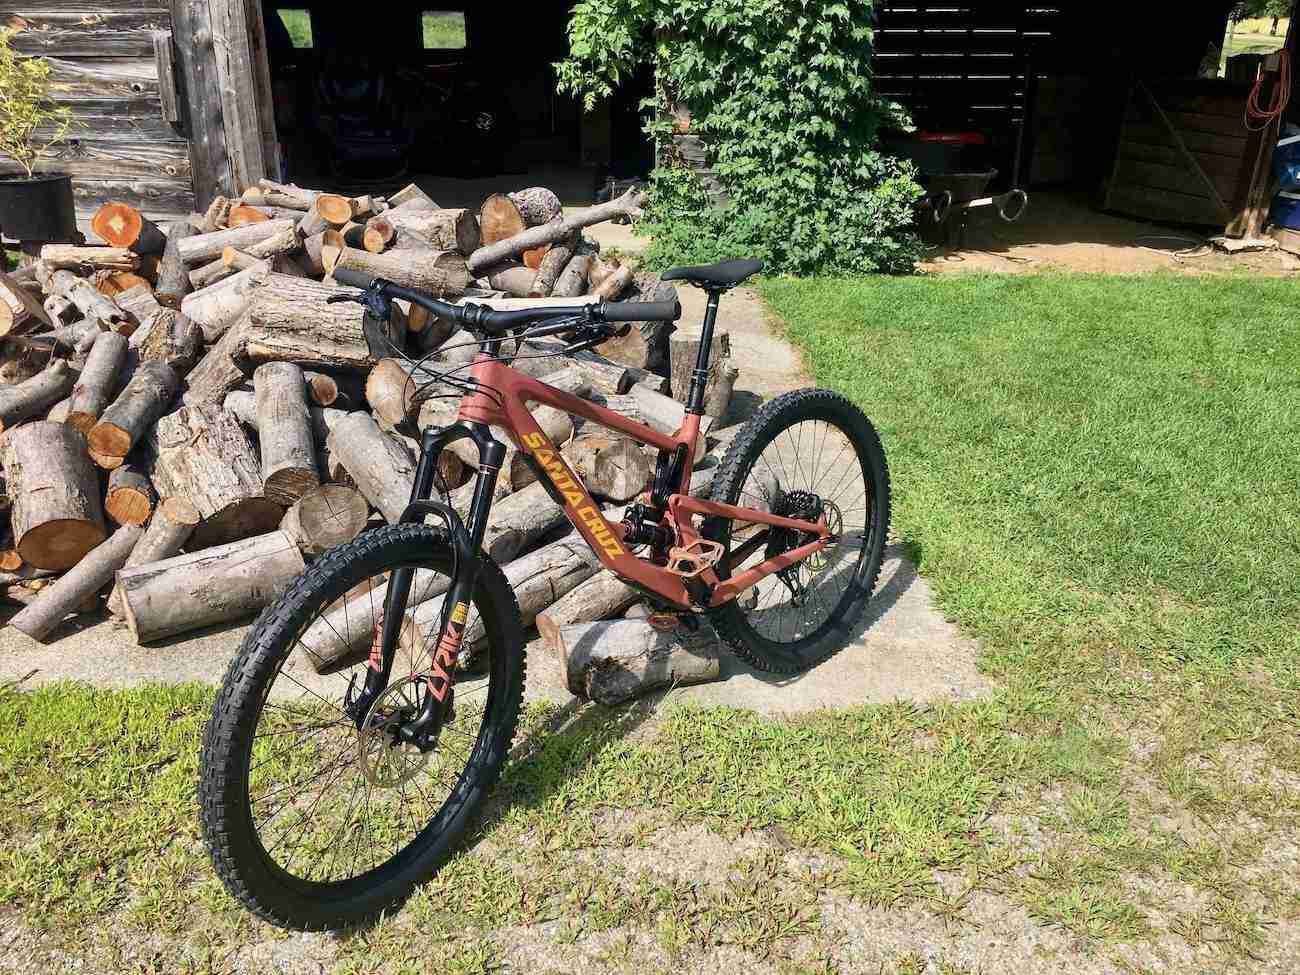 Buying A Used Mountain Bike: 7 Questions To Ask & Other Helpful Tips